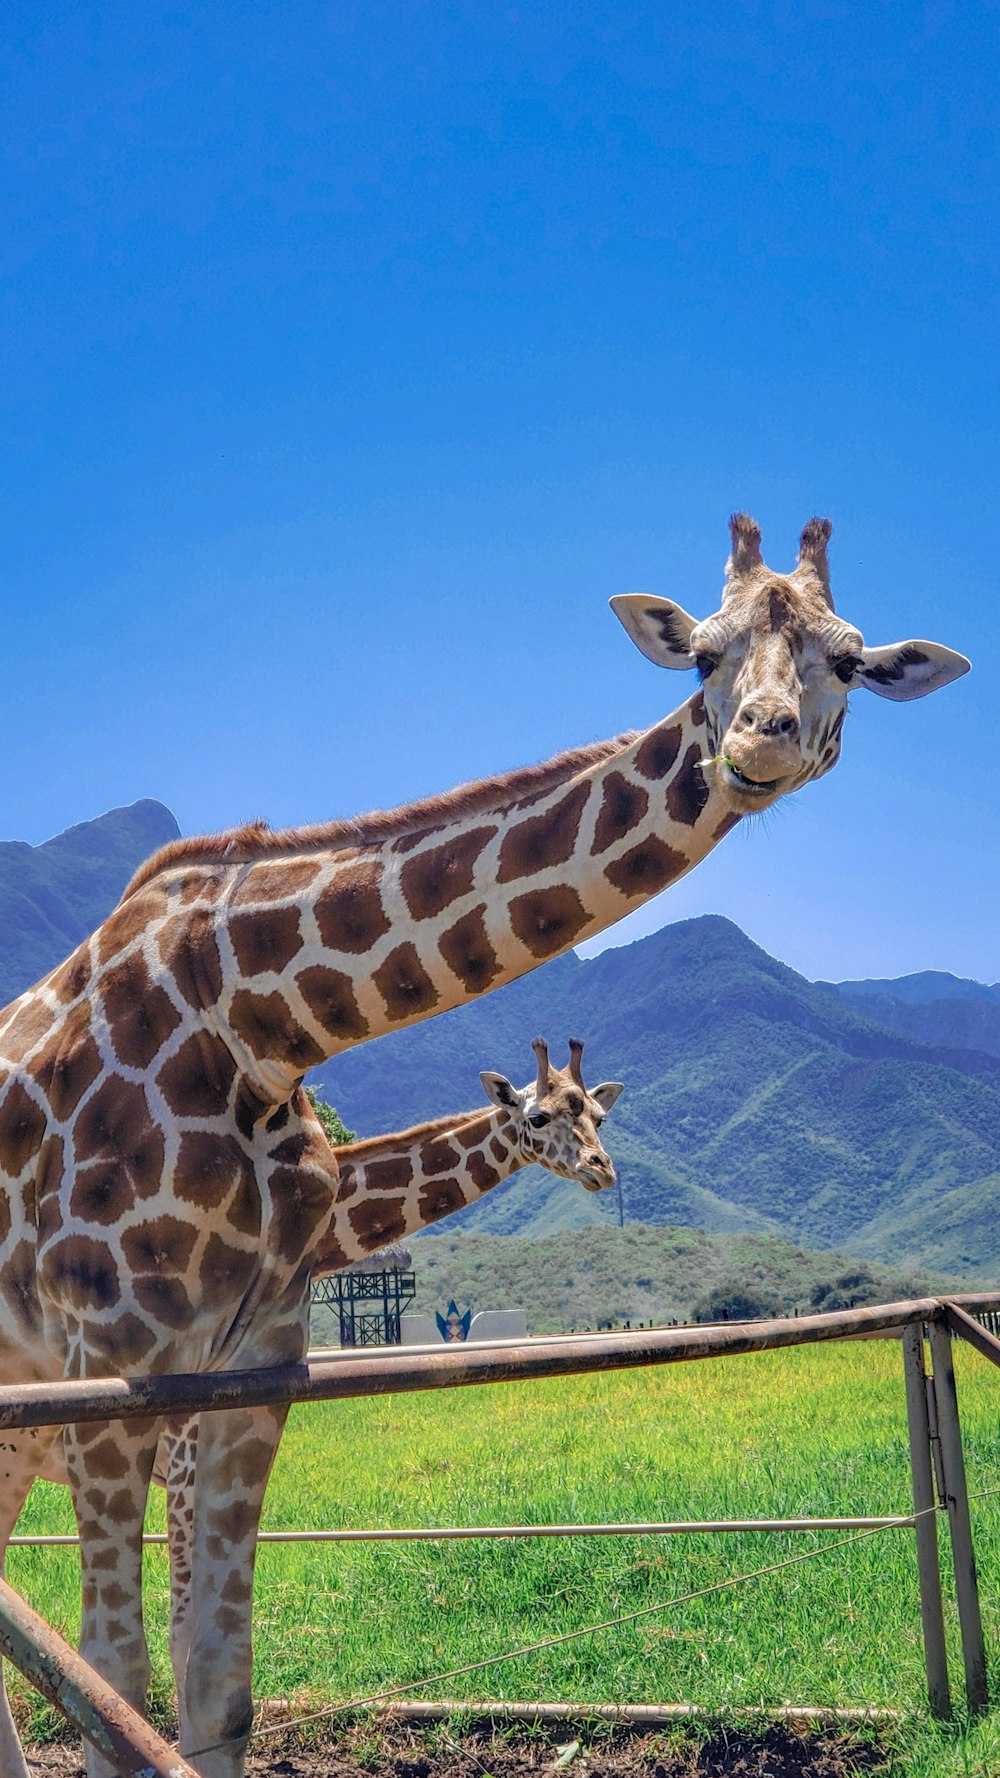 a couple of giraffe standing next to each other on a lush green field